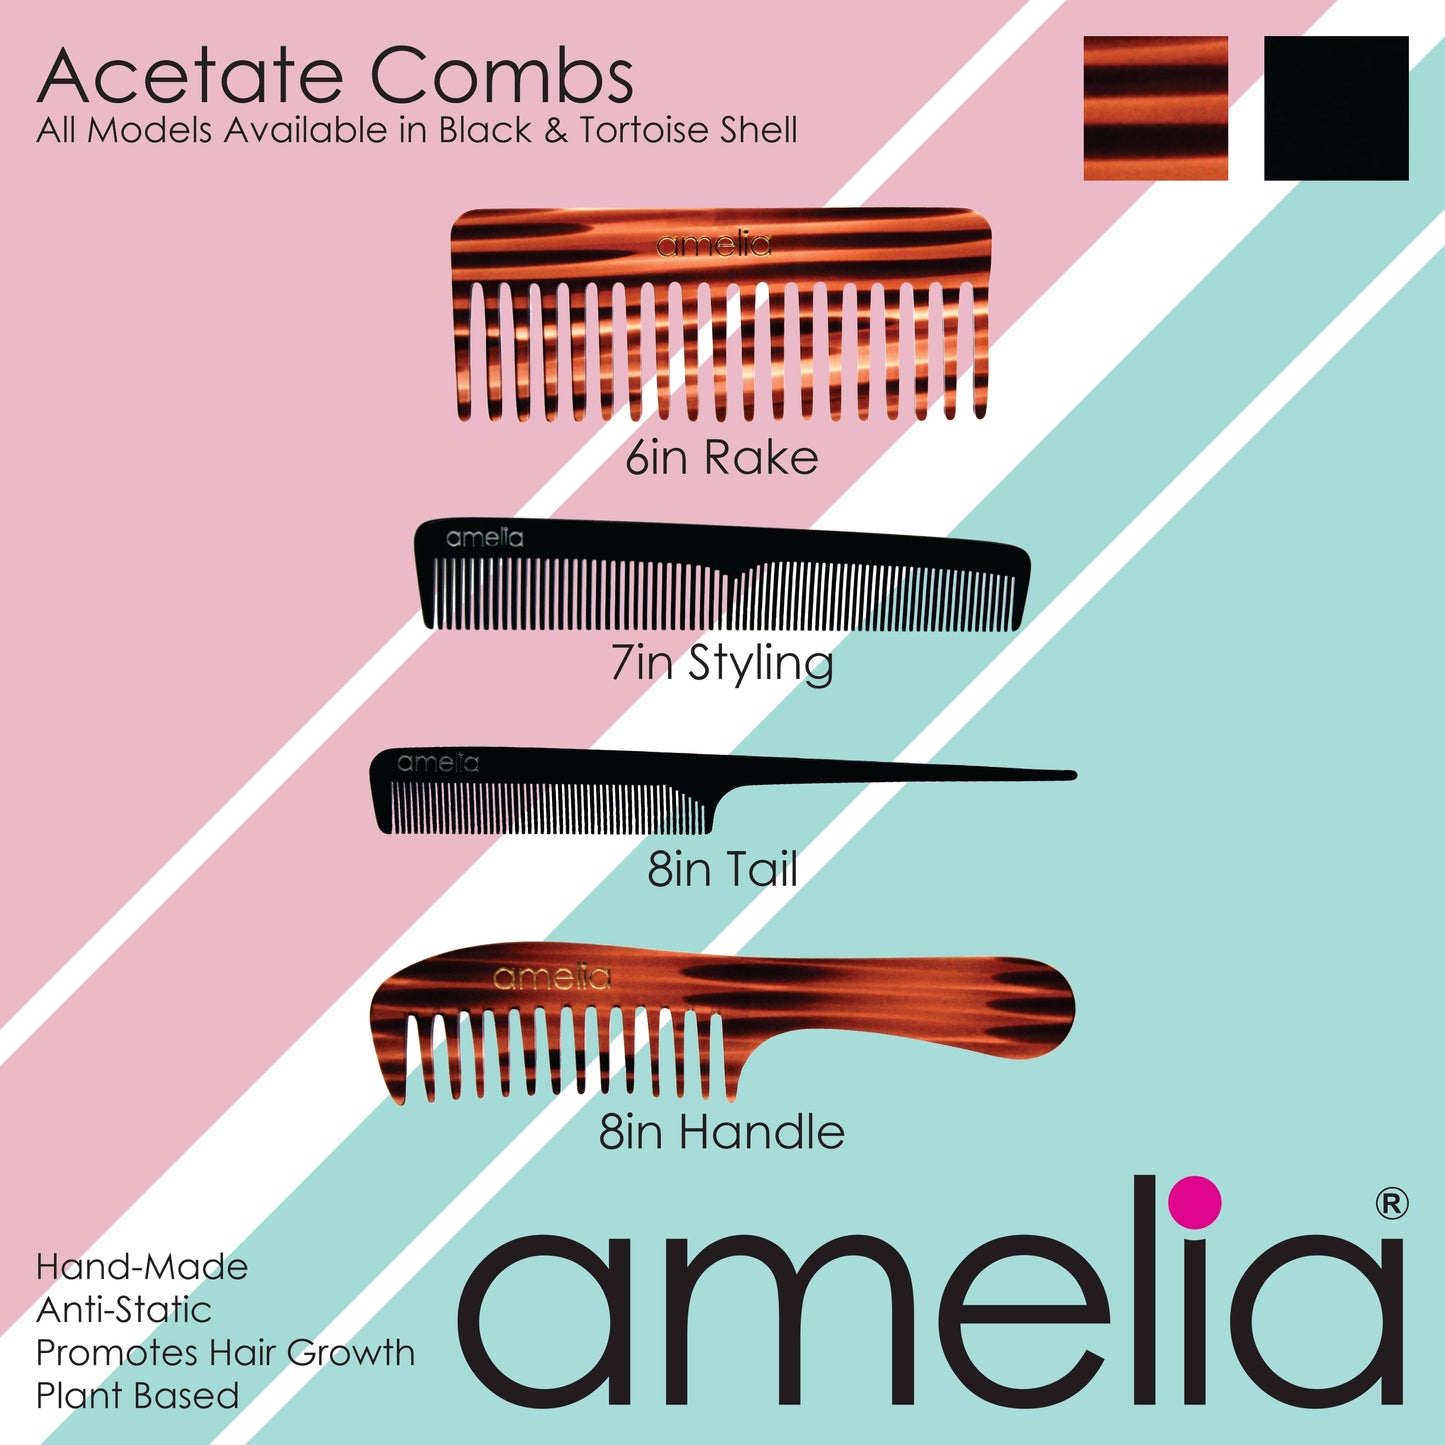 Amelia Beauty Cellulose Acetate 6in Rake Detangling Comb, Handmade, Smooth Edges, Eco-Friendly Plant Based Material,  Course Teeth - Tortoise Shell Color